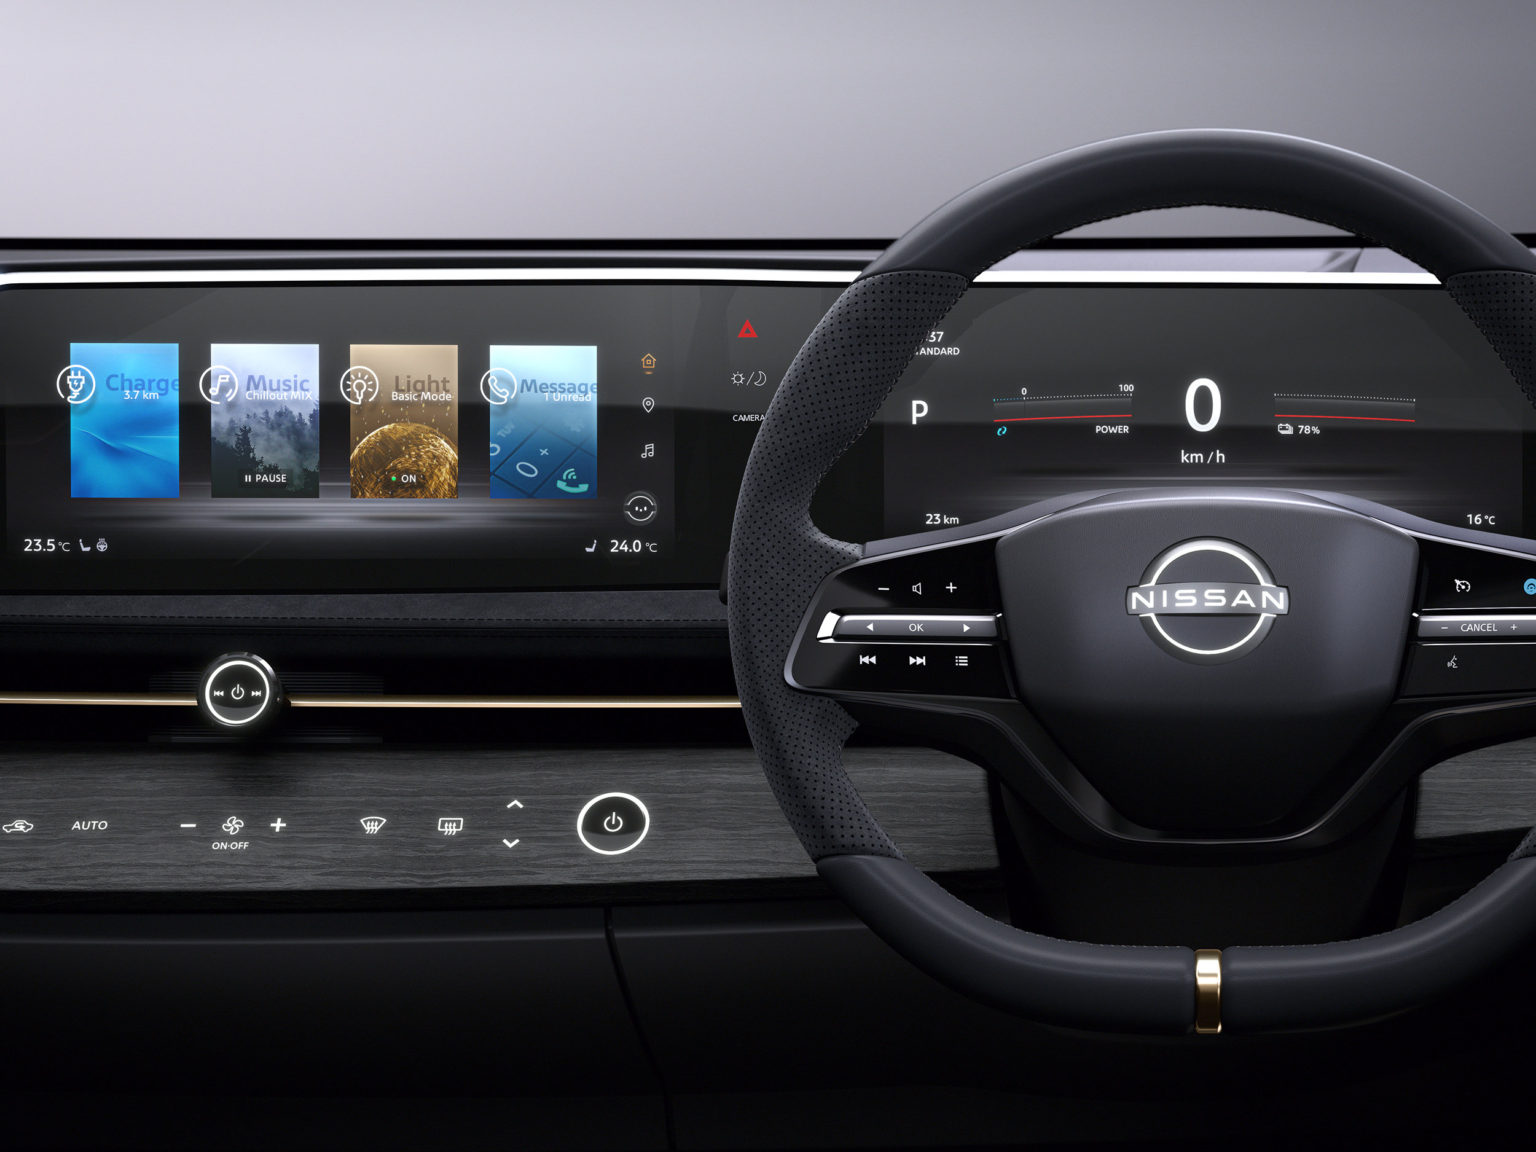 The Nissan concept shows off a single wide screen instead of two separate disolays.